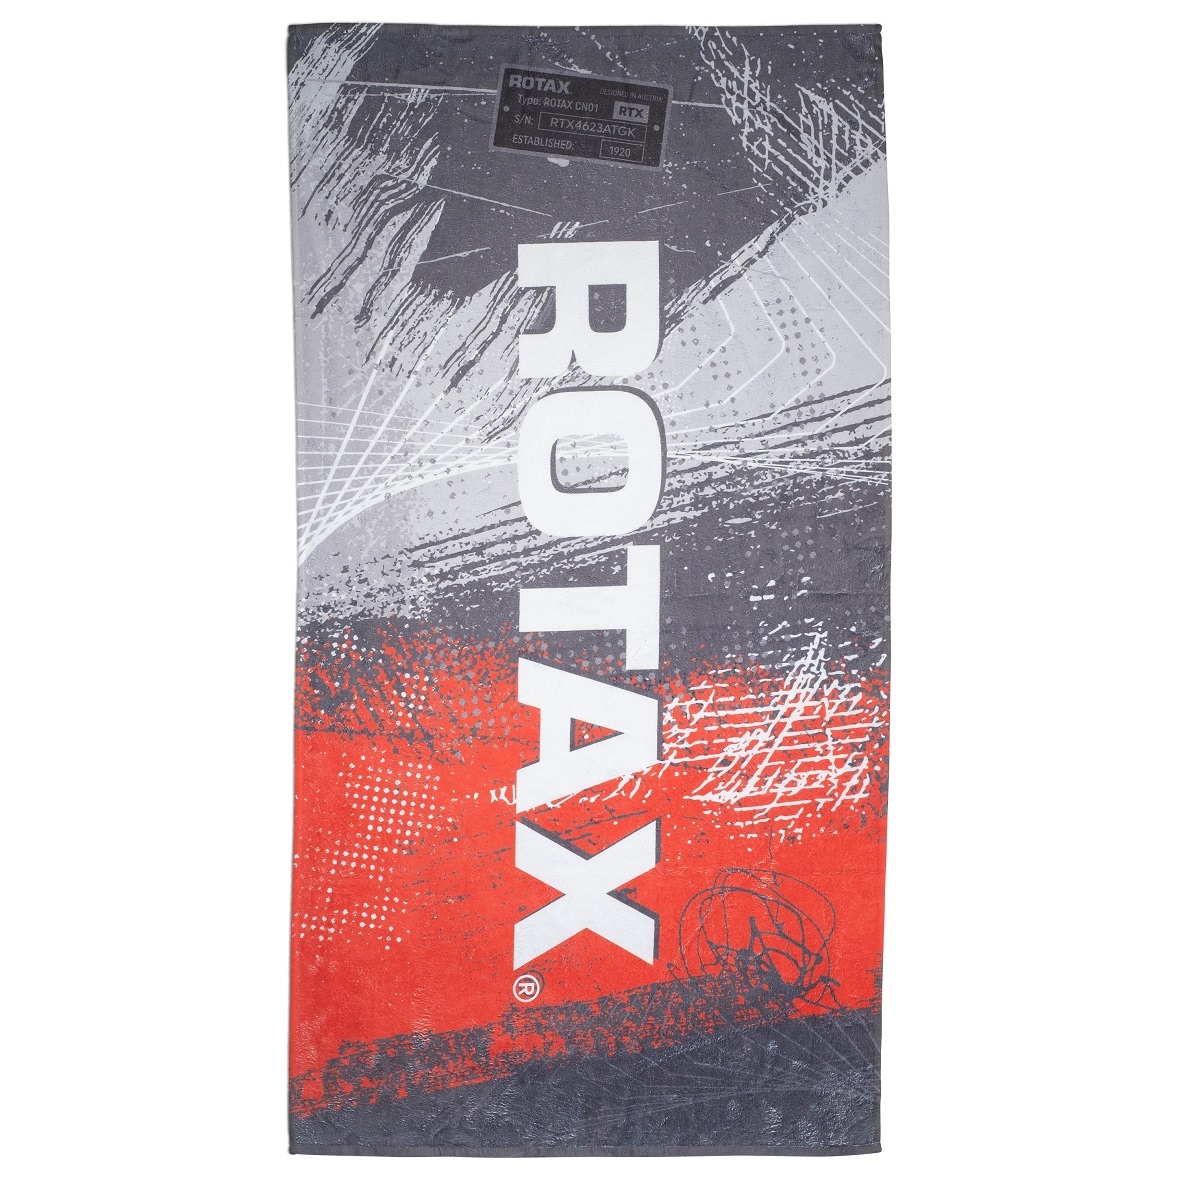 Towel BRP Rotax Limited Edition